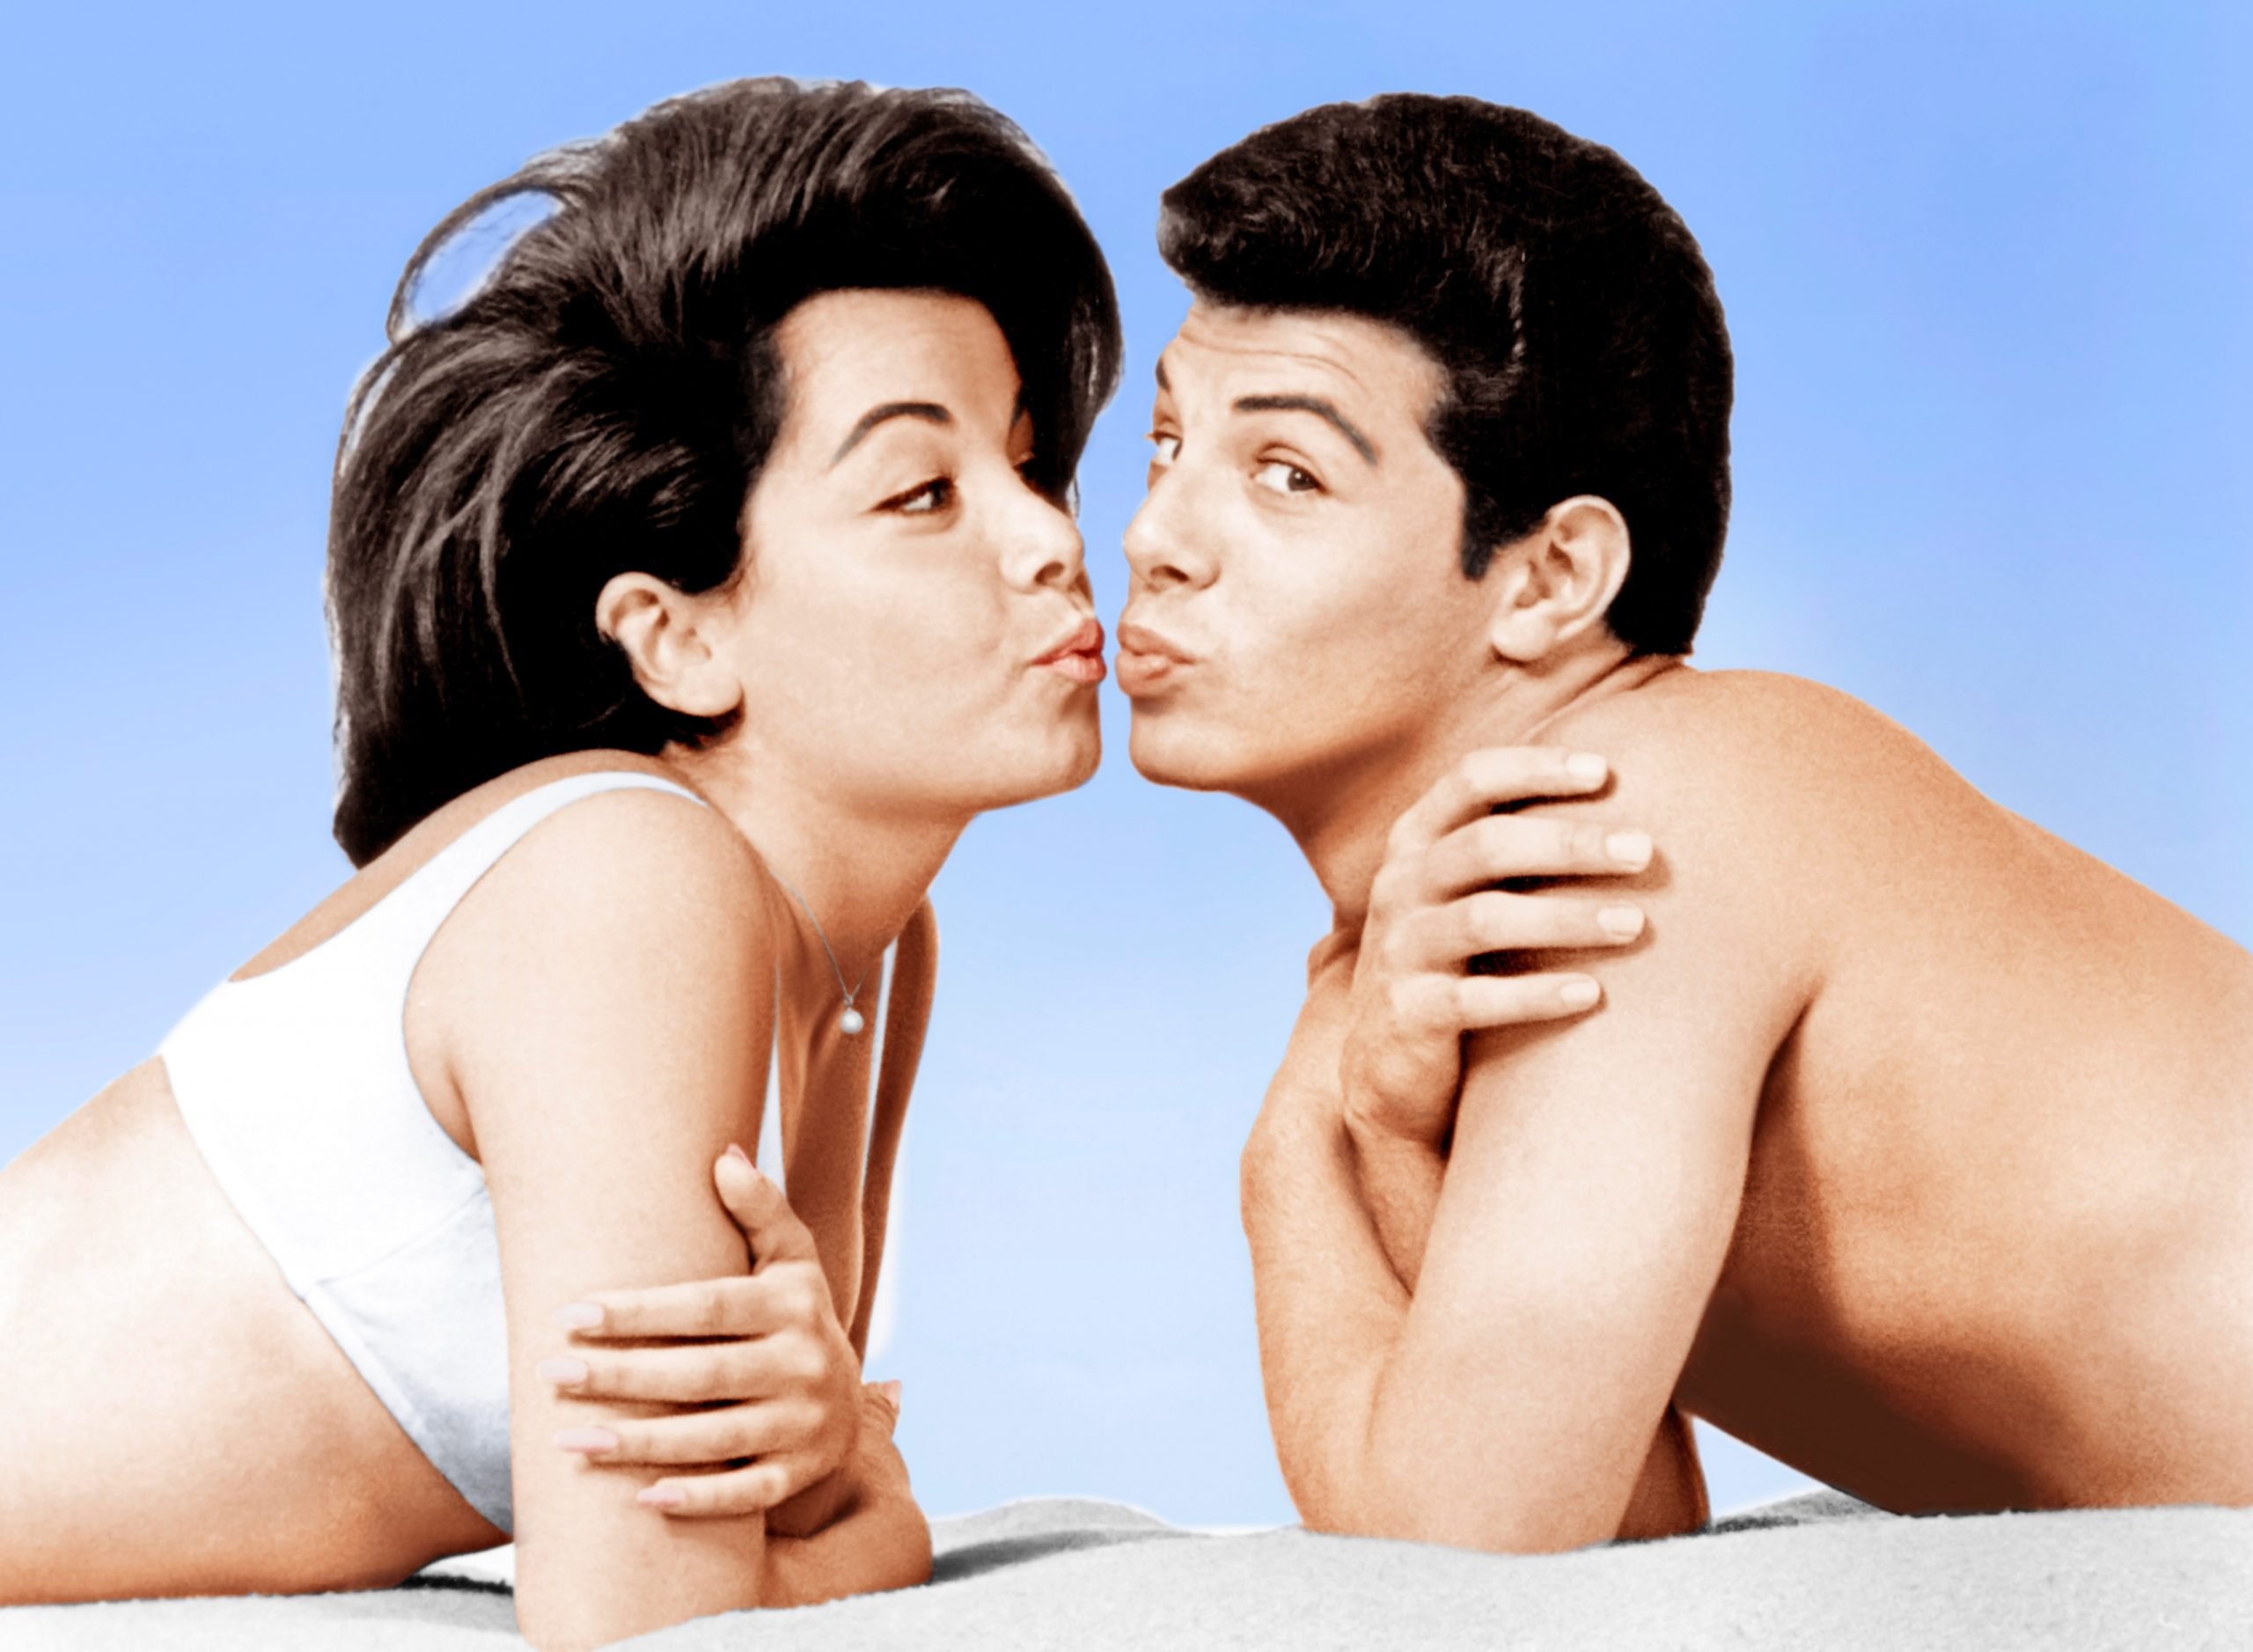 annette-funicello-frankie-avalon-beach-party